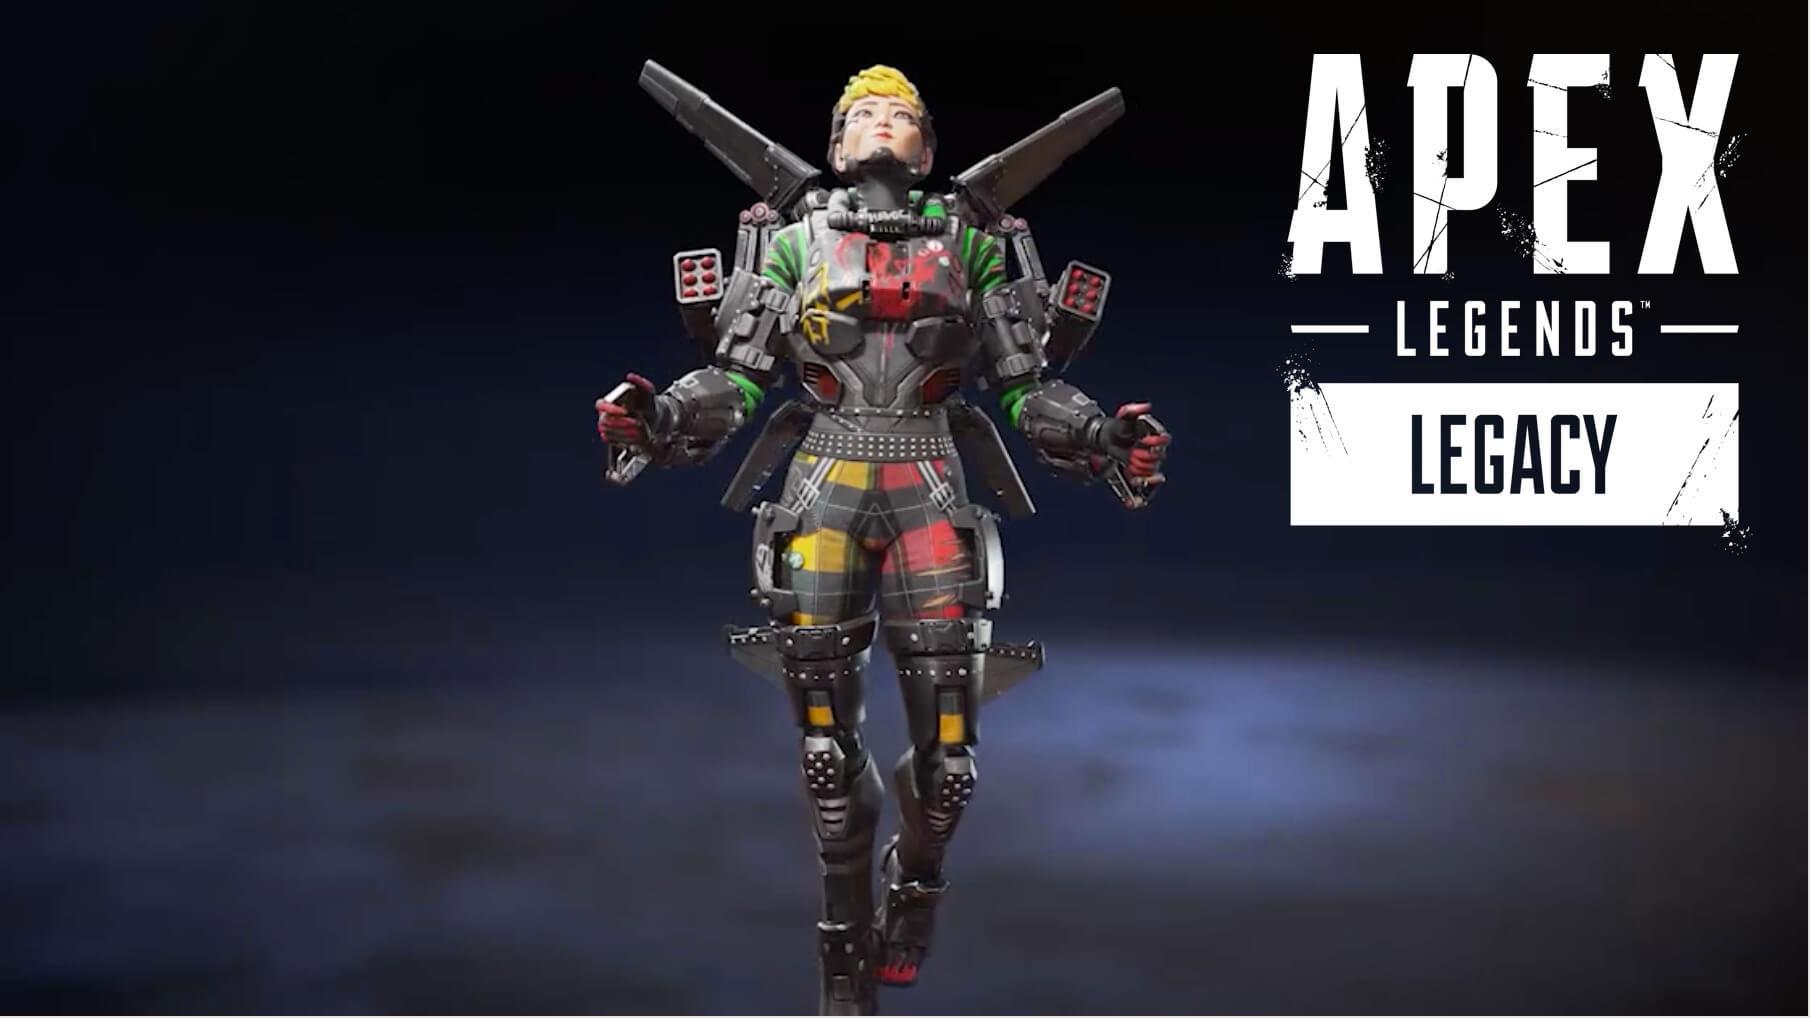 Twitch Prime members get two Apex Legends skins to celebrate